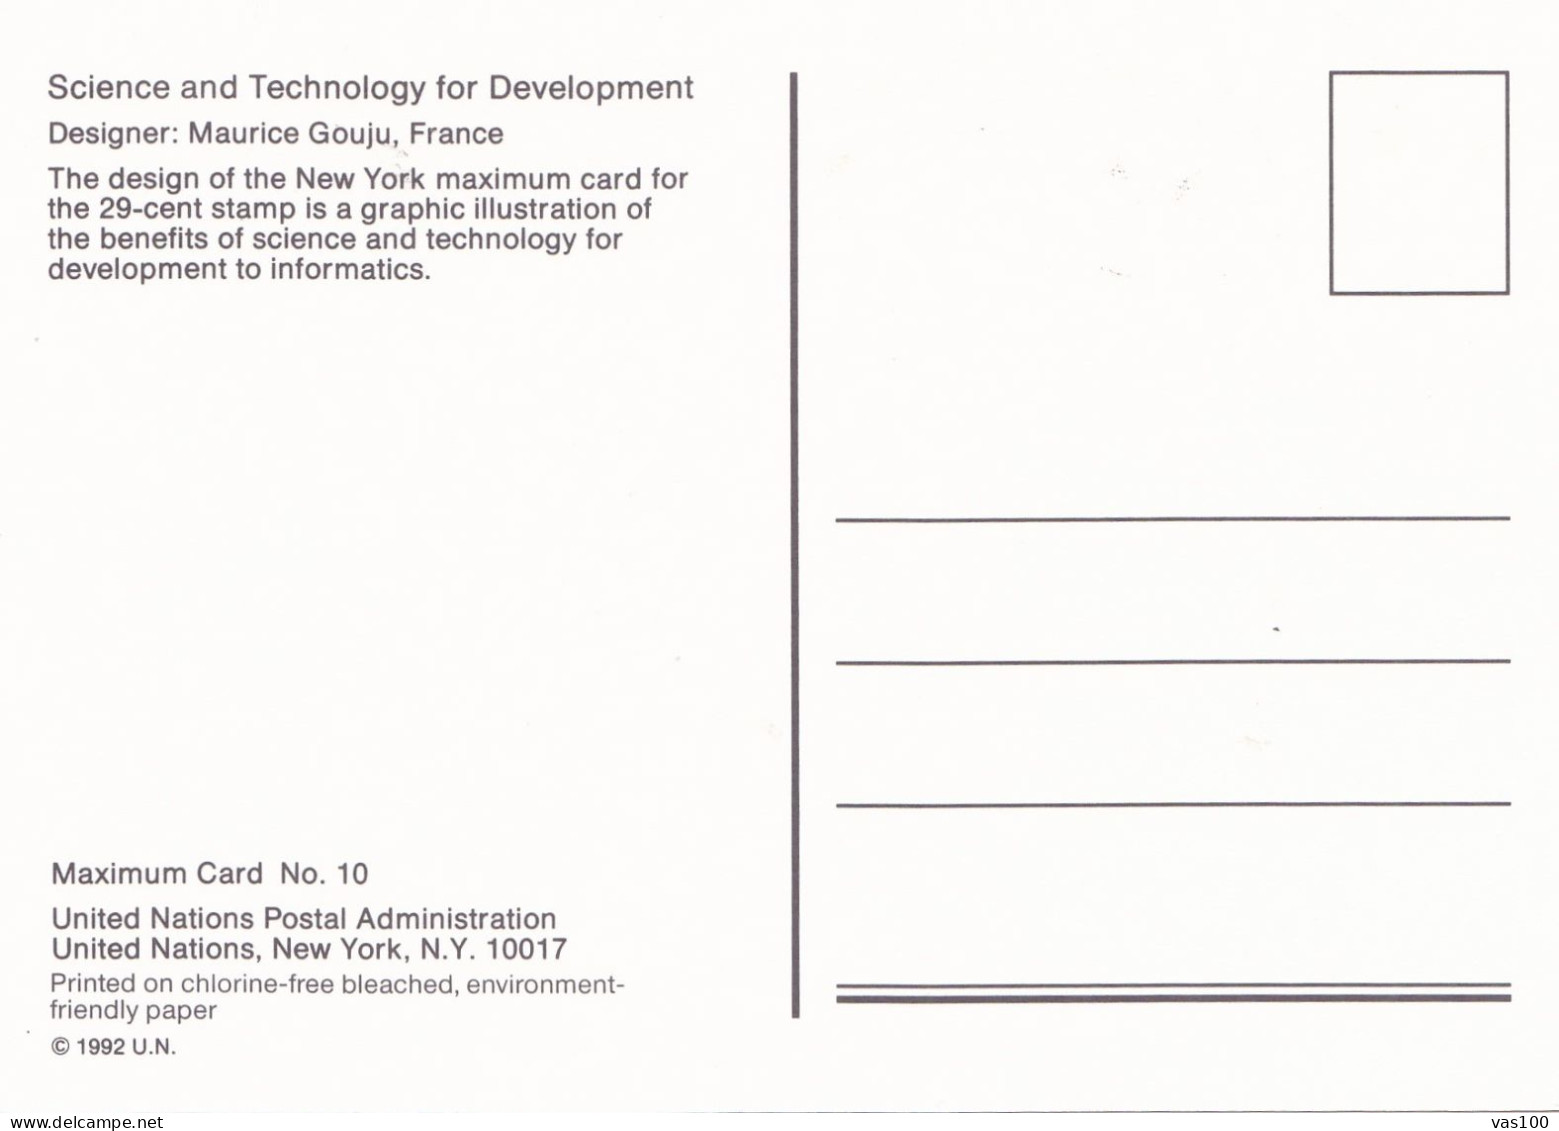 SCIENCE AND TECHNOLOGY FOR DEVELOPMENT  MAXIMUM CARD UNITED NATIONS NEW YORK 1992 U.N. - Computers